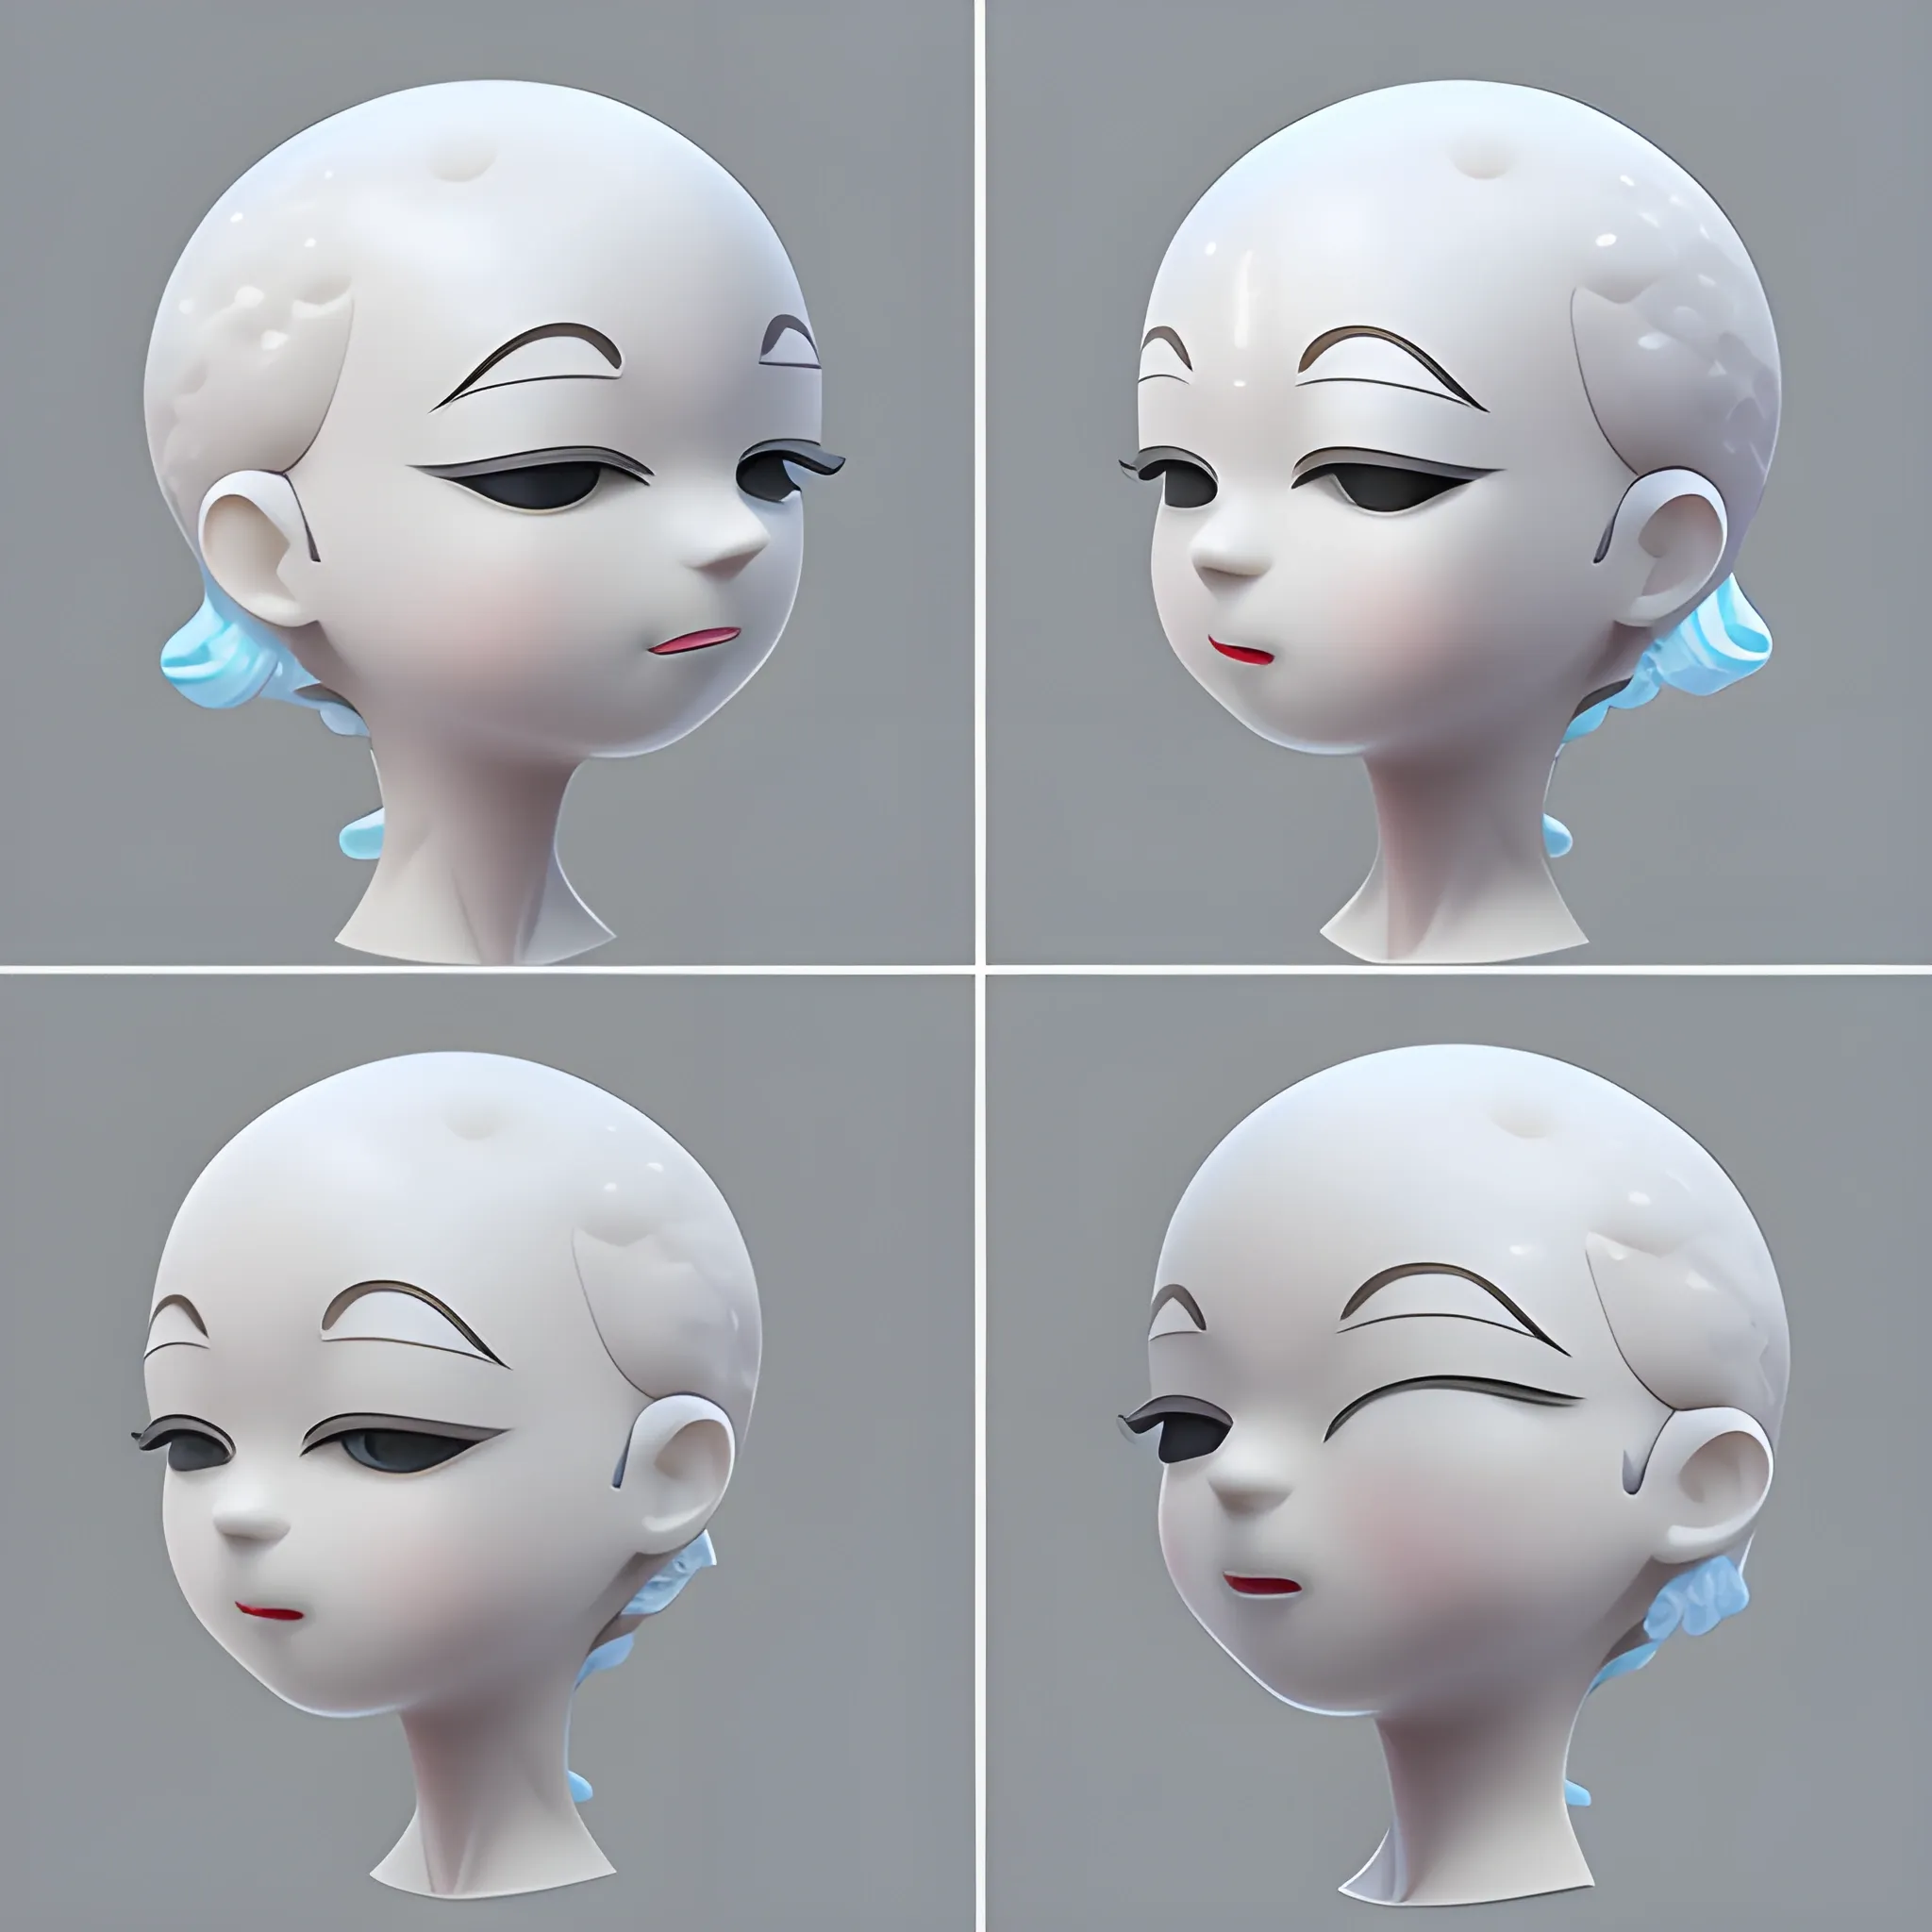 , 3D，White pulp, abstract water droplet shaped head, resembling an H-shaped body, with a relatively trendy overall style. The entire head to body ratio is a 1:1 or 1:2 Q-version character image, with a large head and simple eyes on the face. The personality is lively and cute